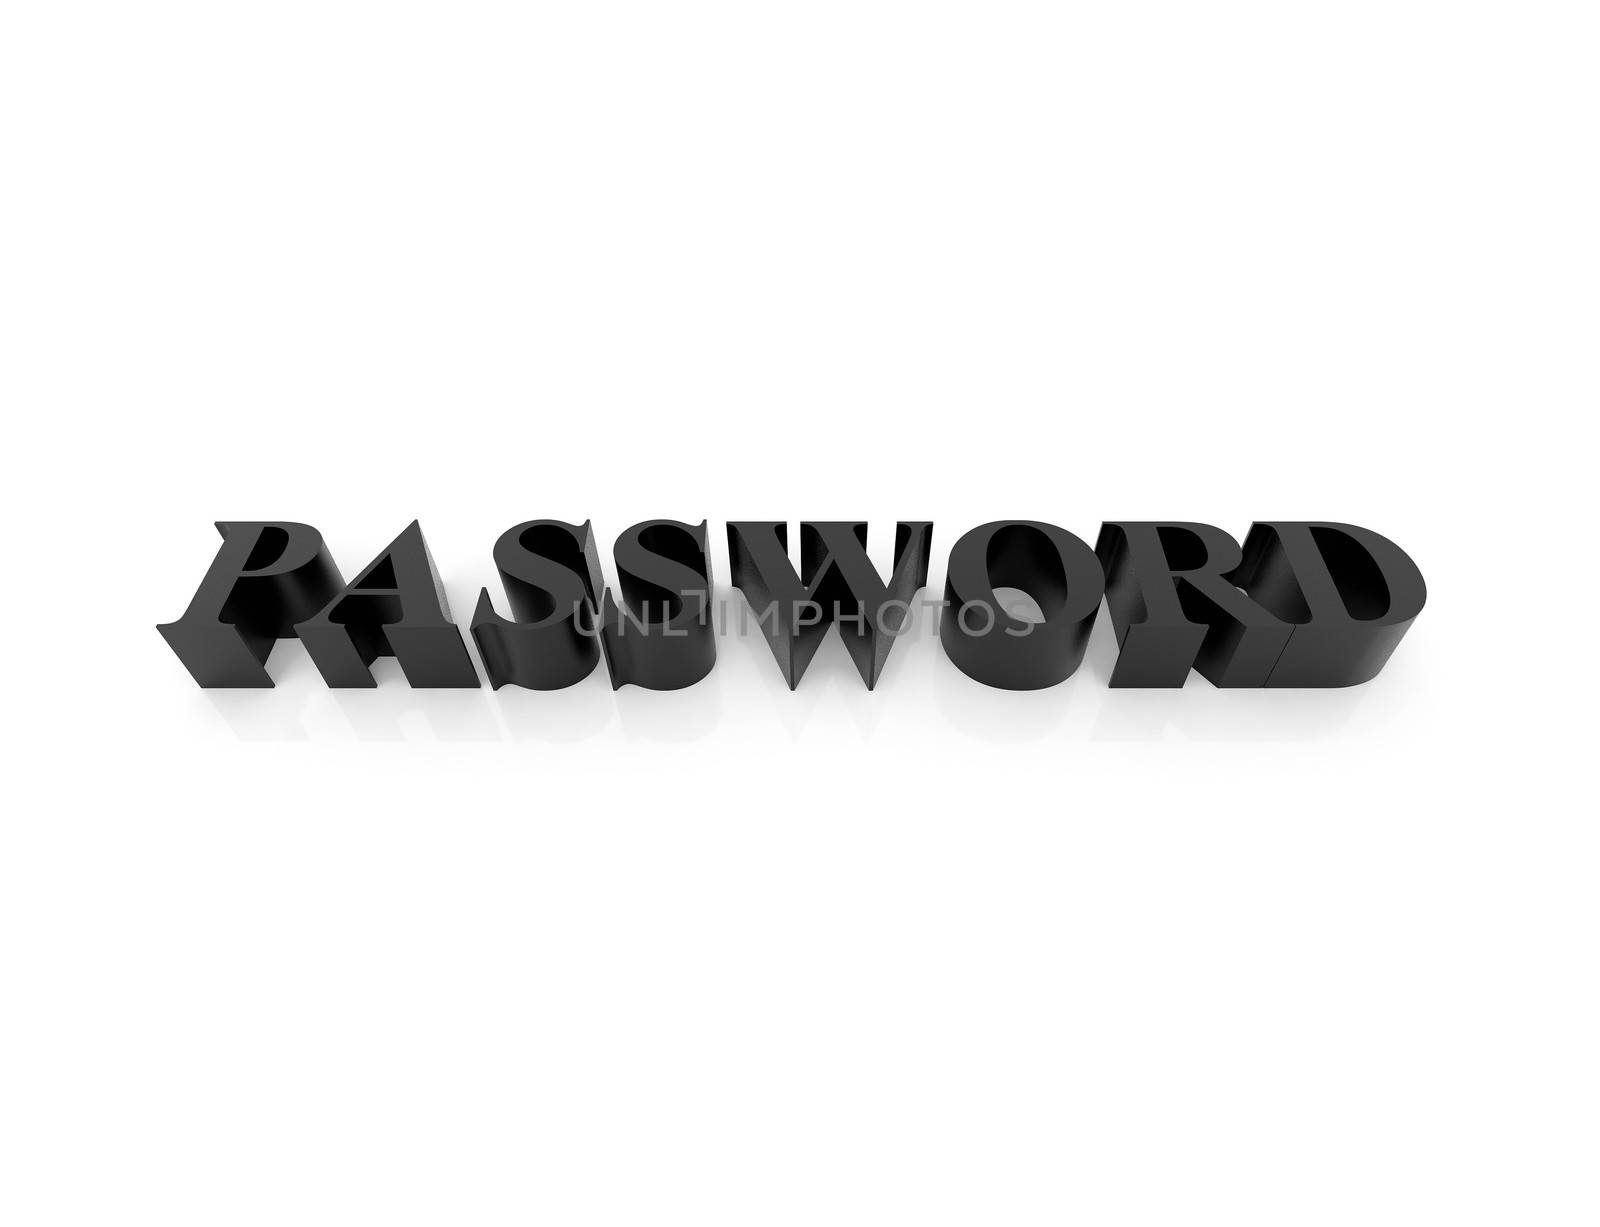 password by rook